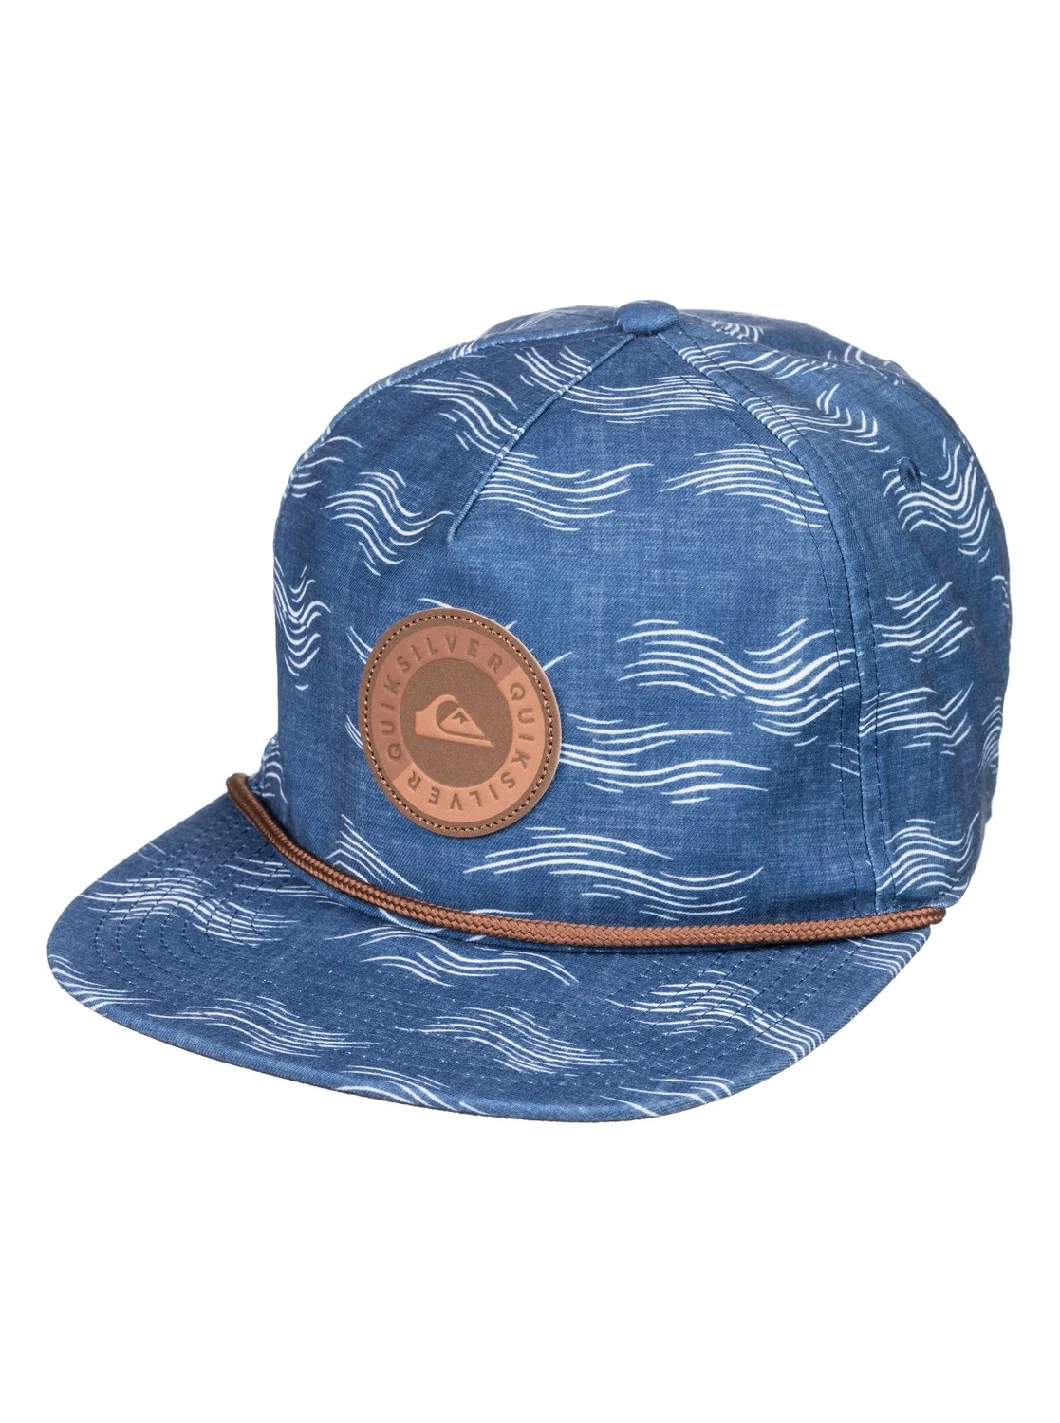 All-Over Printing 5 Panel Snapback Hat with Leather Patch